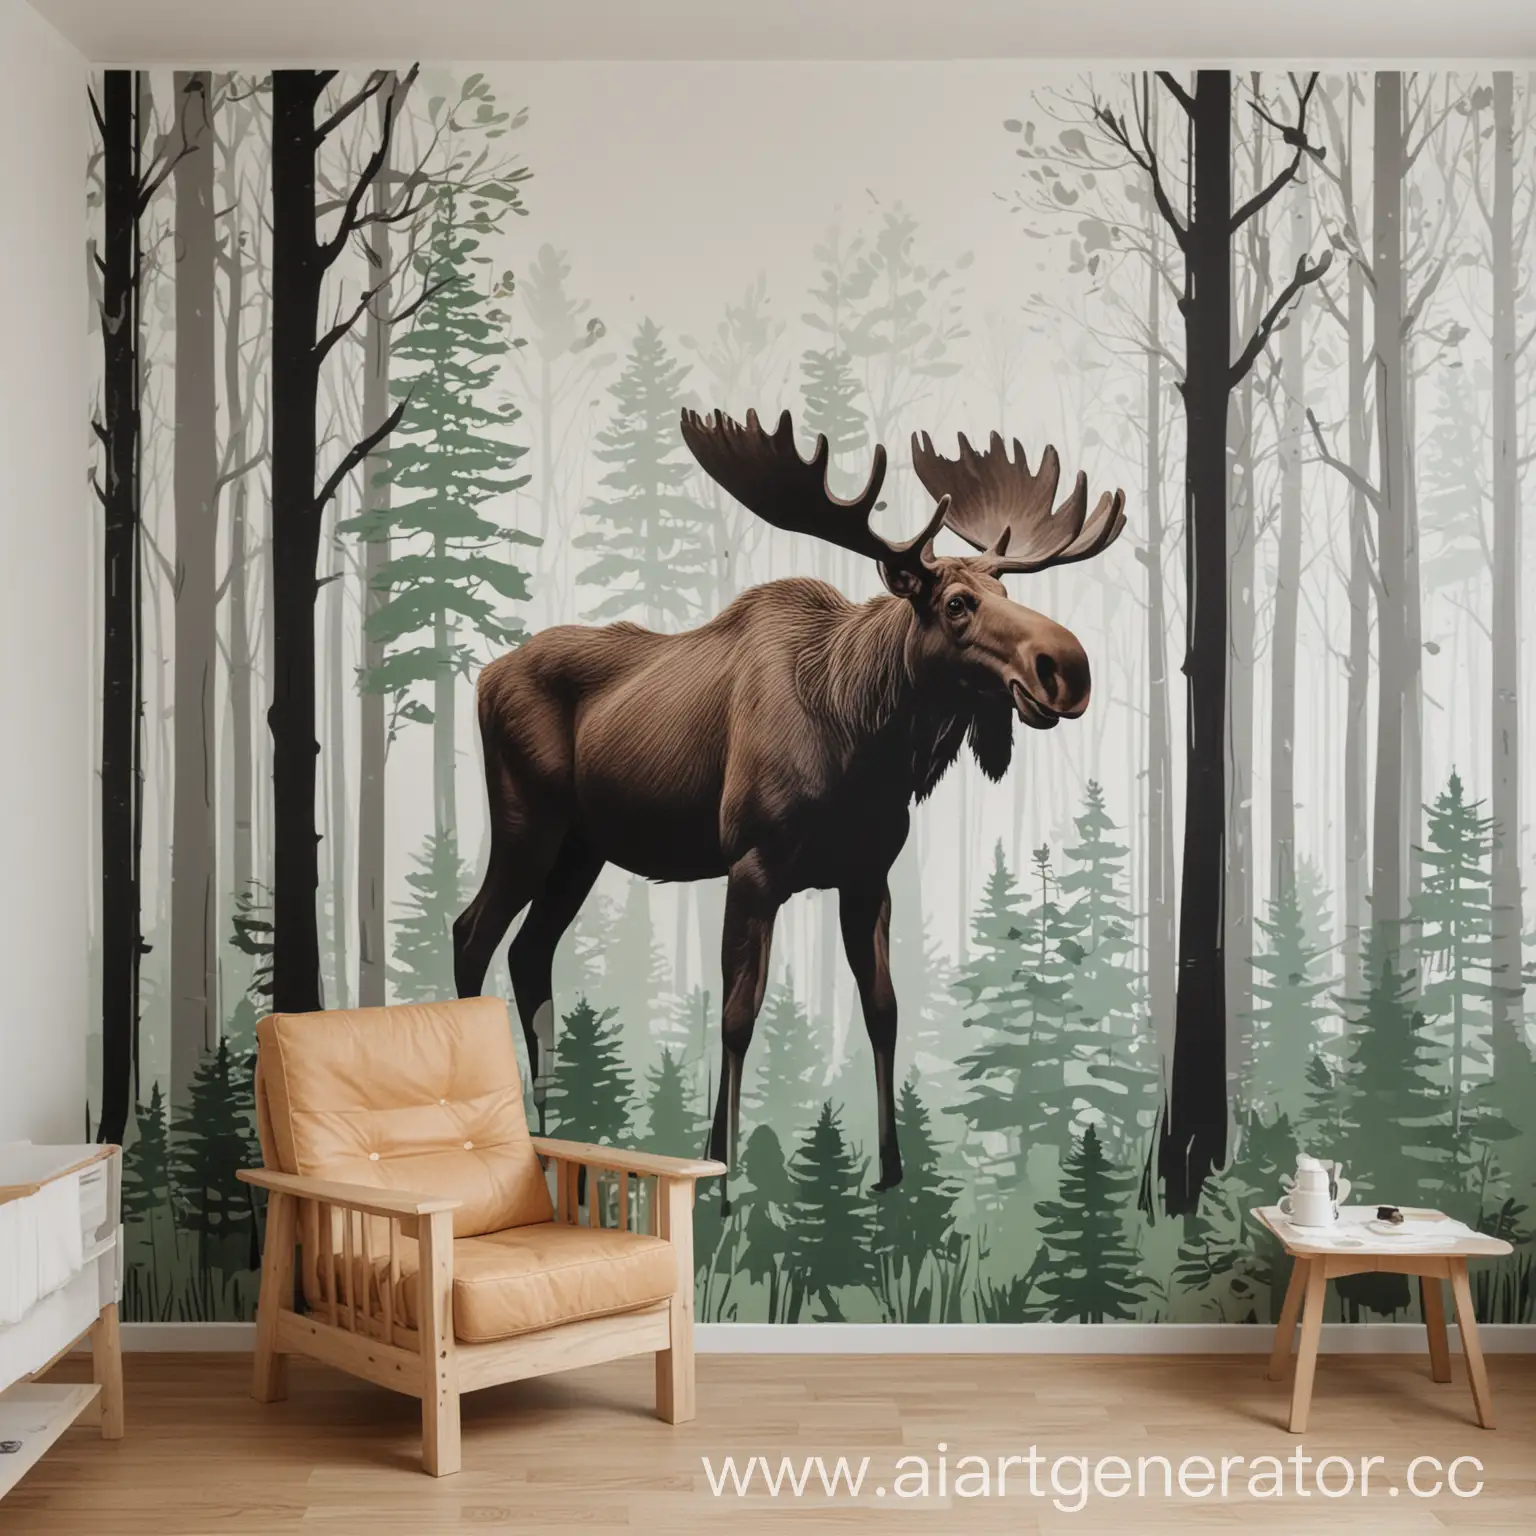 Moose-in-Forest-Whimsical-Mural-for-Childrens-Hospital